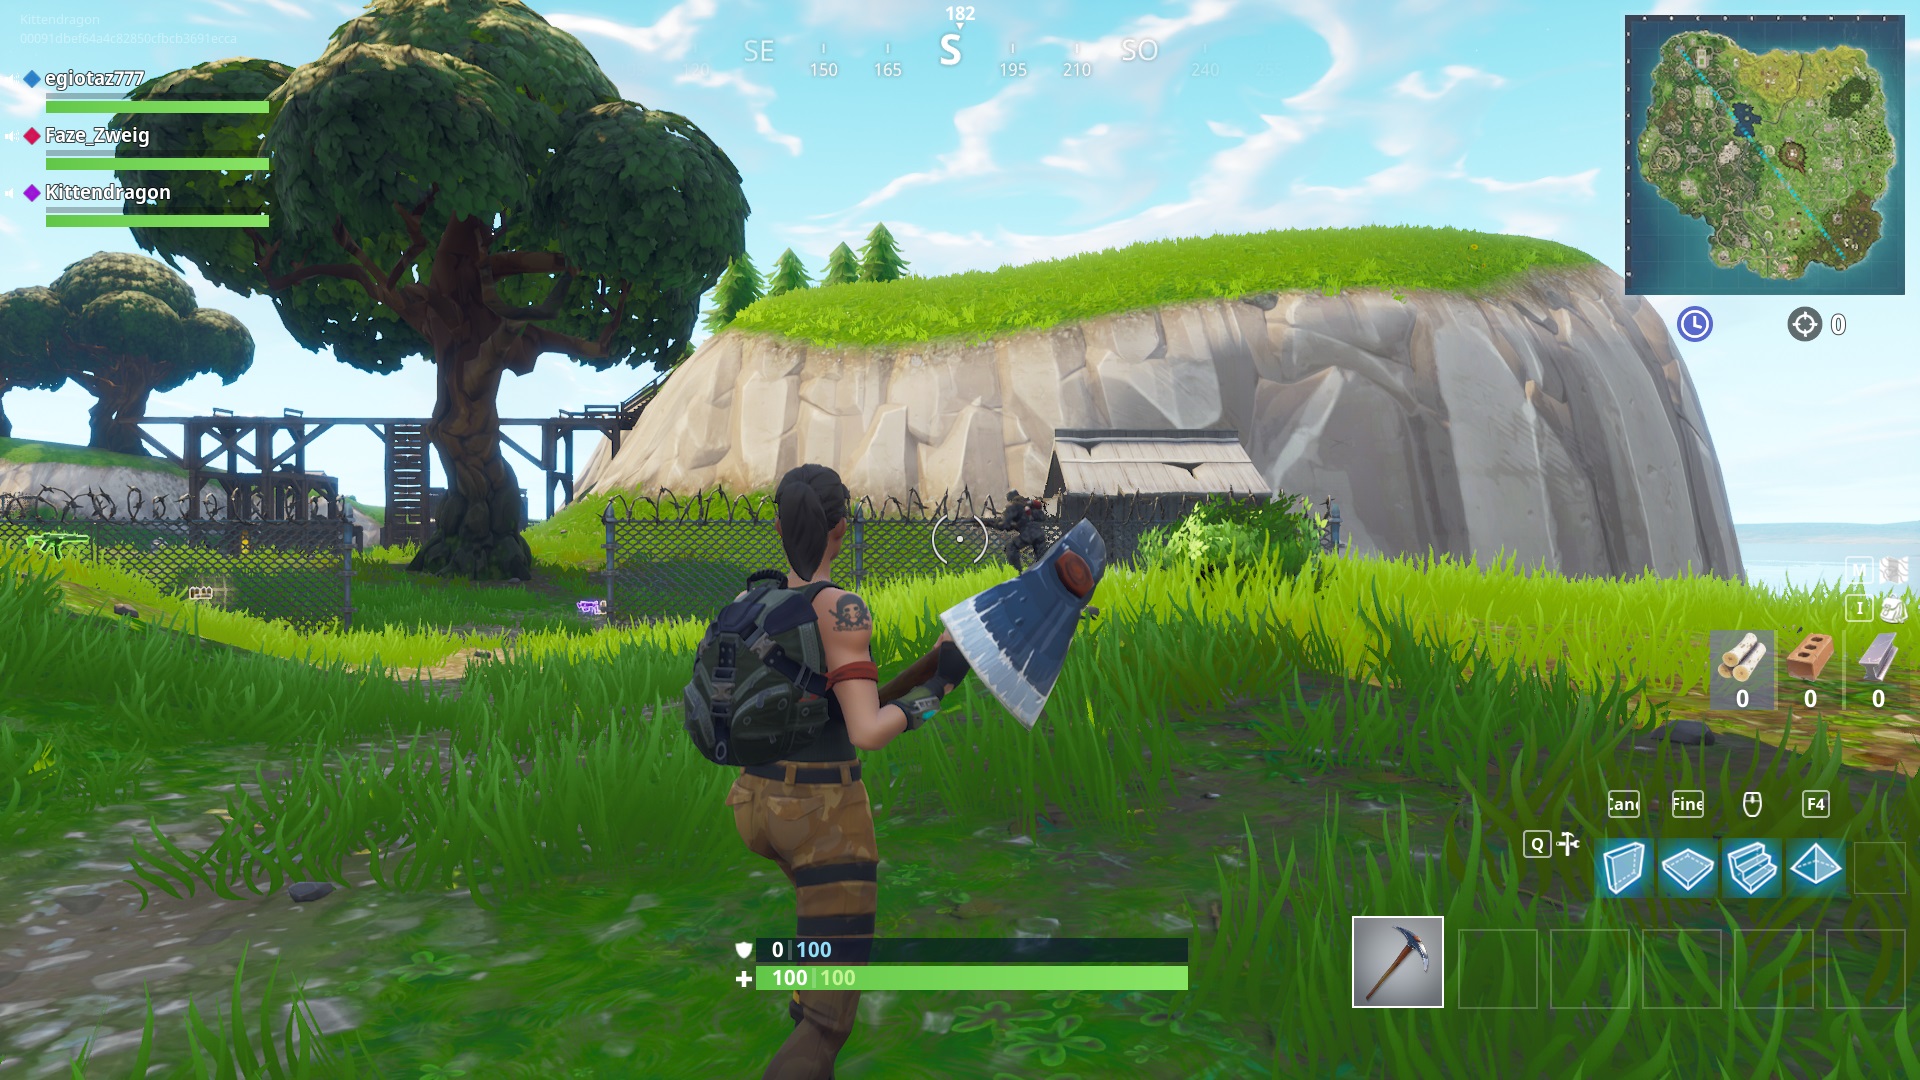 Media asset (photo, screenshot, or image in full size) related to contents posted at 3dfxzone.it | Image Name: Fortnite_Screenshot_5.jpg